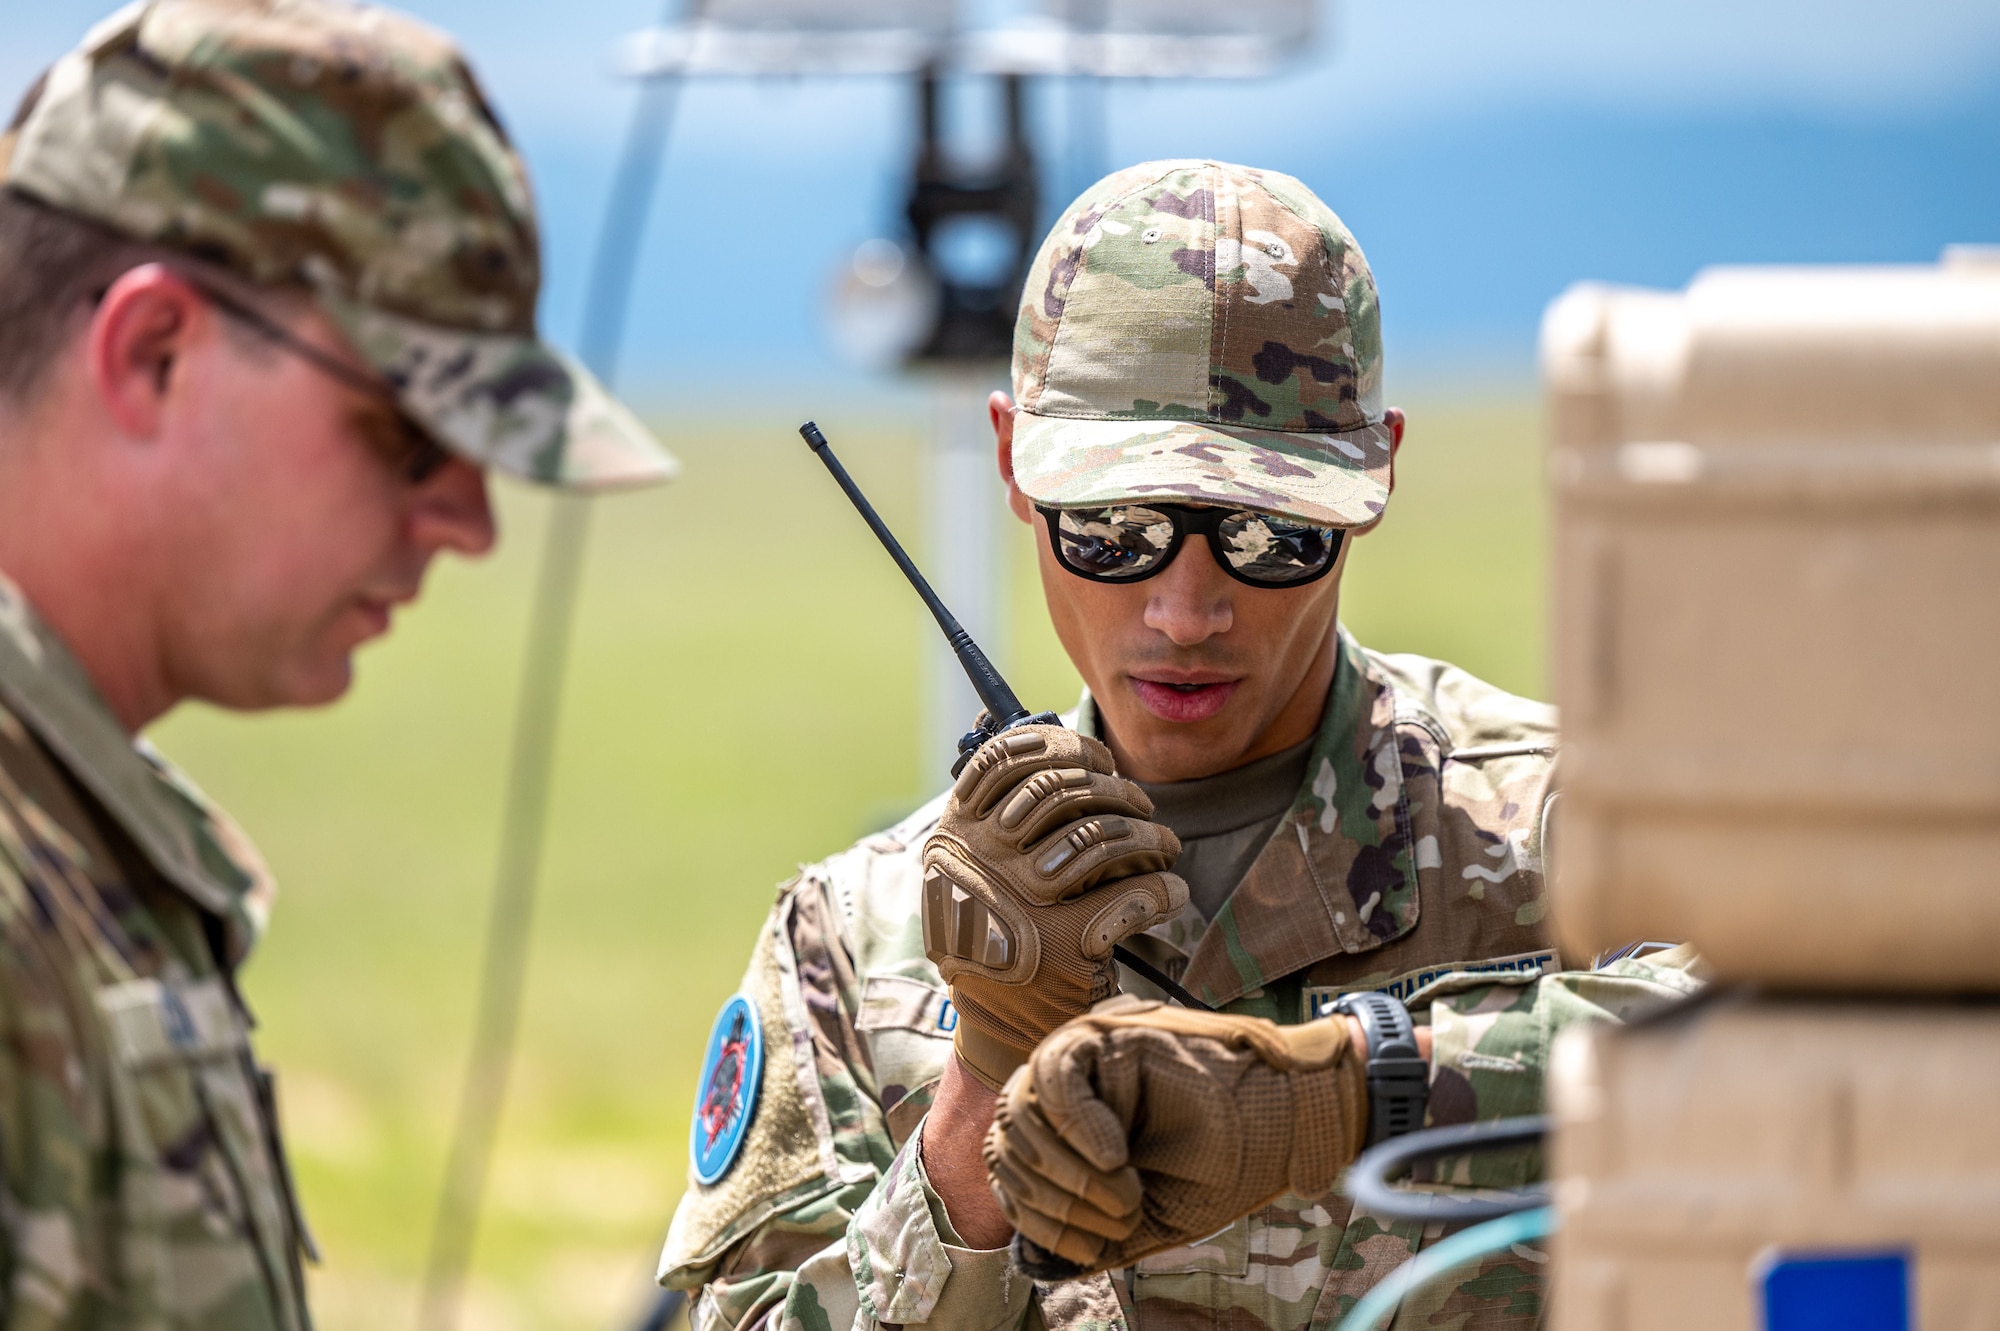 U.S. Space Force Sgt. Jonathan Ojeda, 527th Space Aggressor Squadron (SAS), right, conducts Global Positioning System (GPS) electromagnetic interference training with a GPS electromagnetic attack system at Schriever Space Force Base, Colorado, July 18, 2023. The 527th SAS’s mission is to know, teach, and replicate modern, emerging, and integrated space threats in order to prepare service, joint, and coalition forces to fight in and through a Contested, Degraded, and Operationally-limited (CDO) environment. (U.S. Space Force photo by Ethan Johnson)